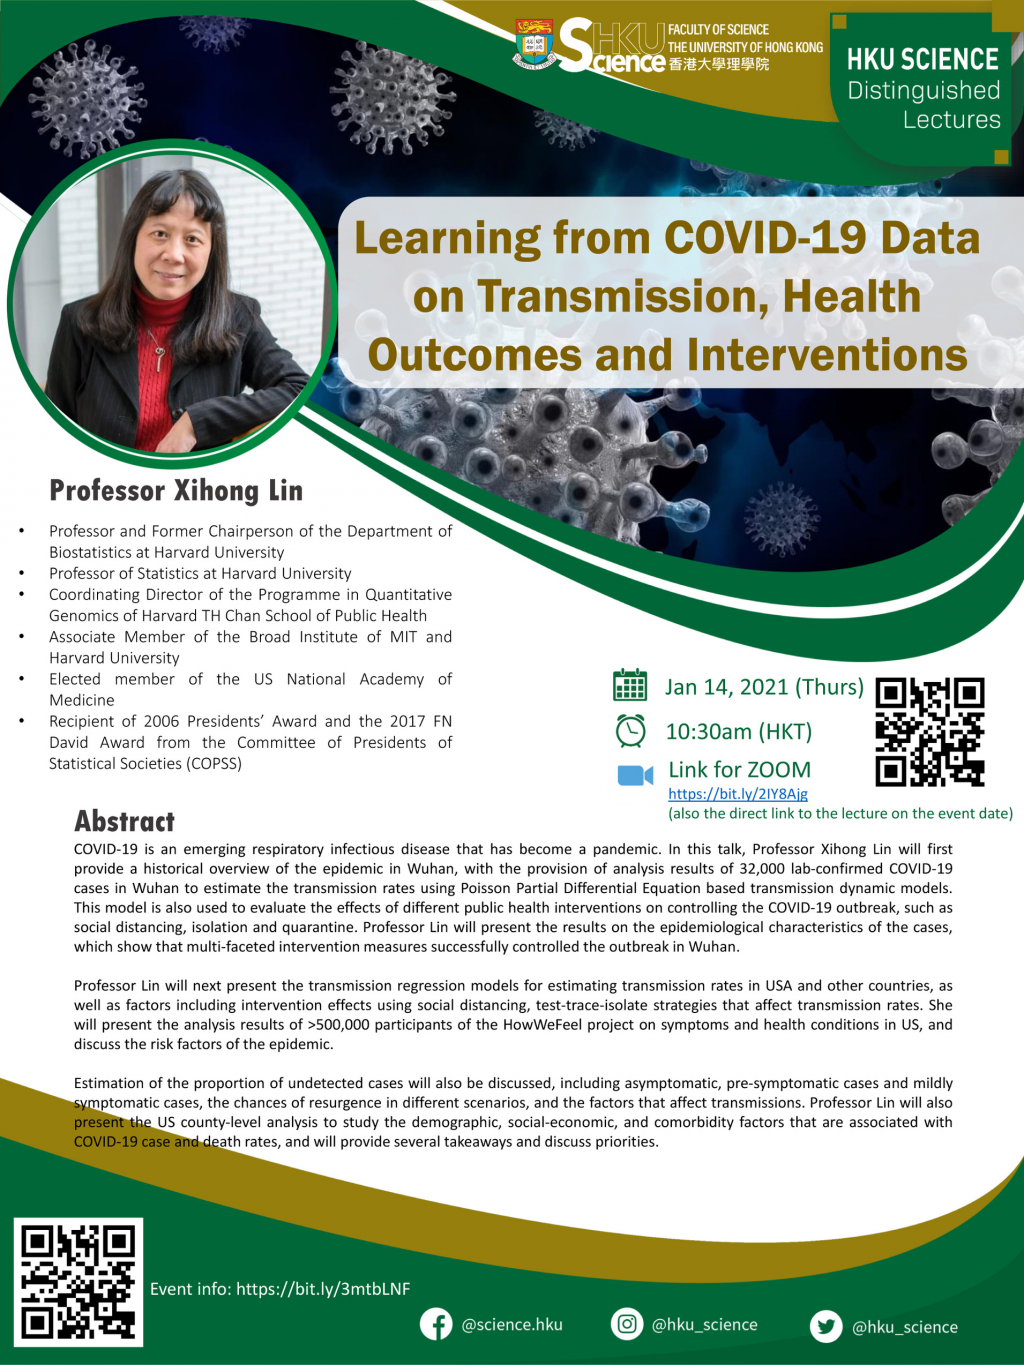 Distinguished Lecture Series - Learning from COVID-19 Data on Transmission, Health Outcomes and Interventions